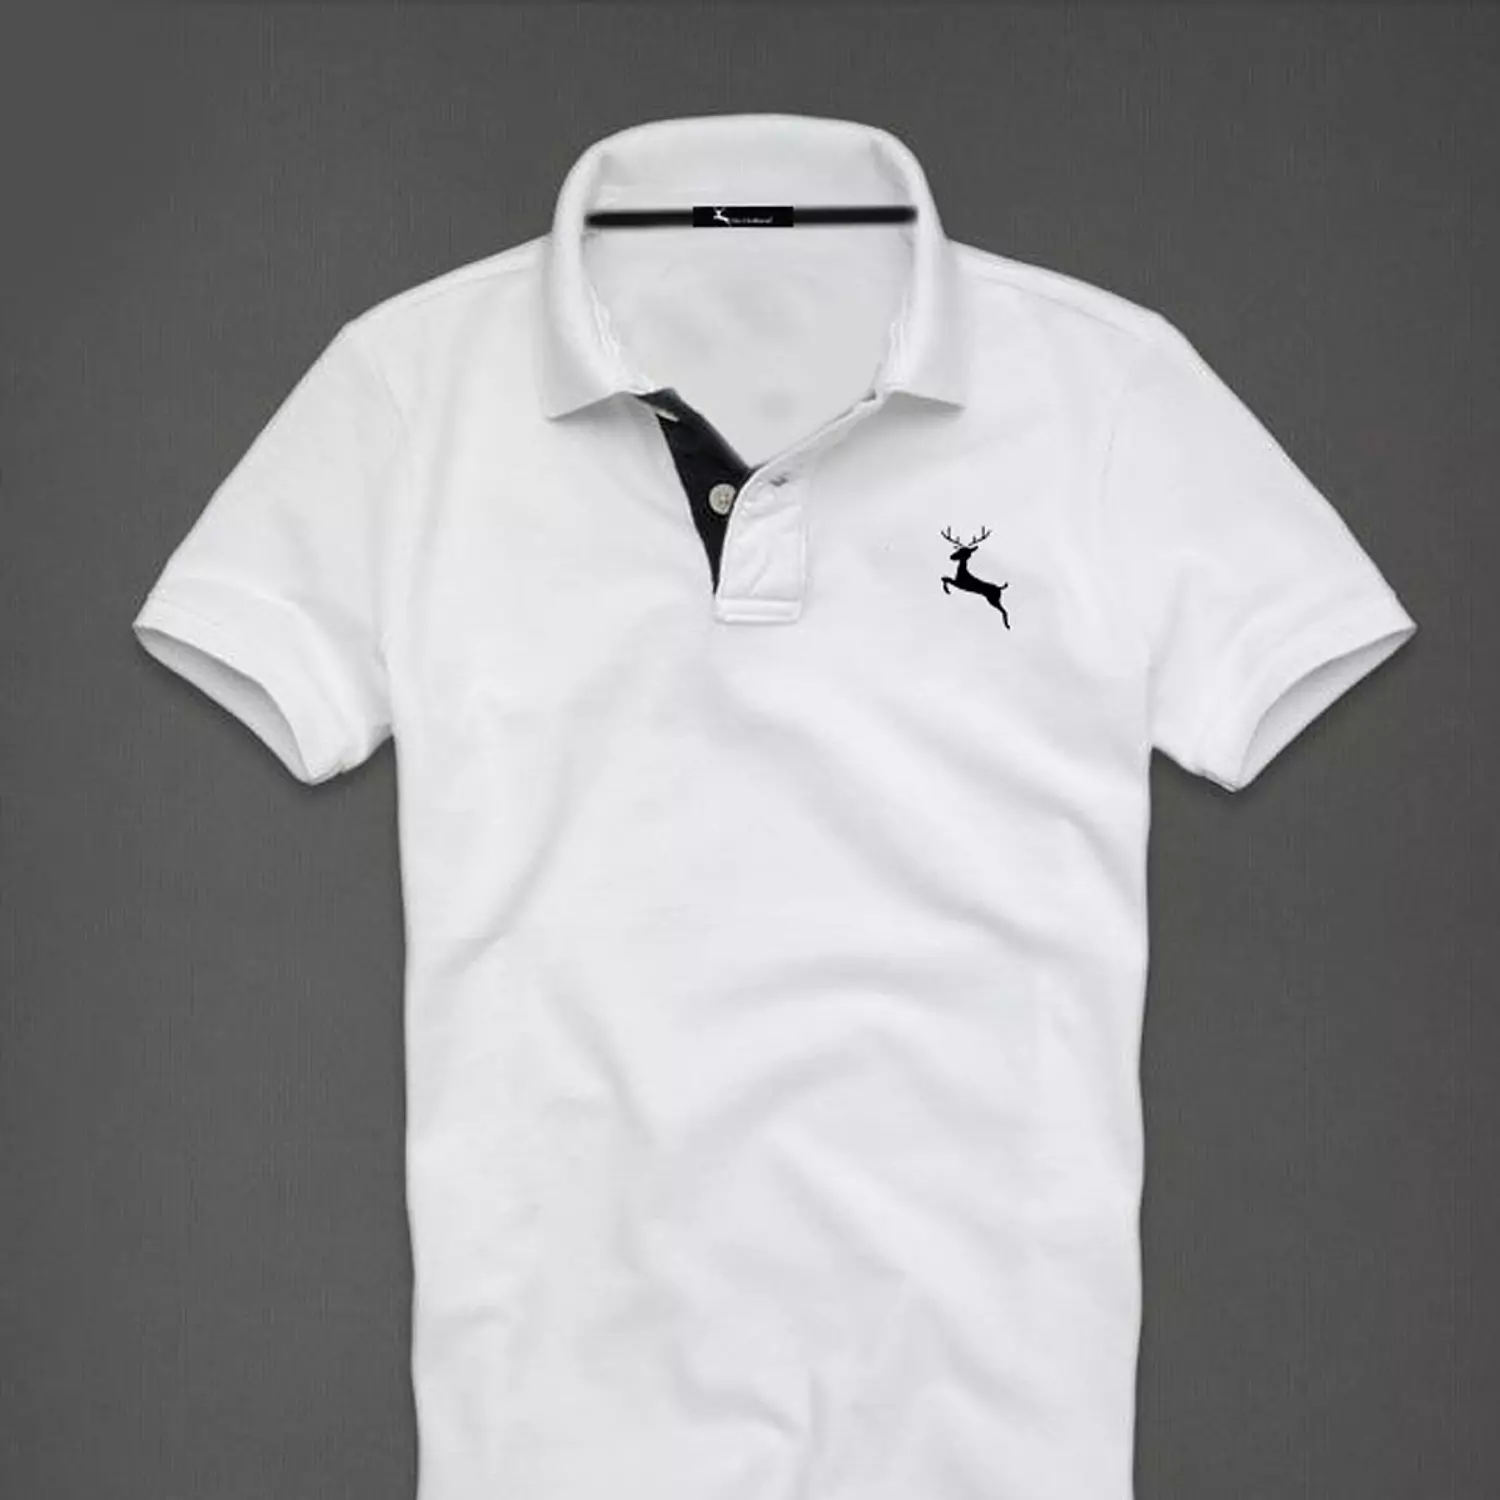 Polo T shirt -White hover image